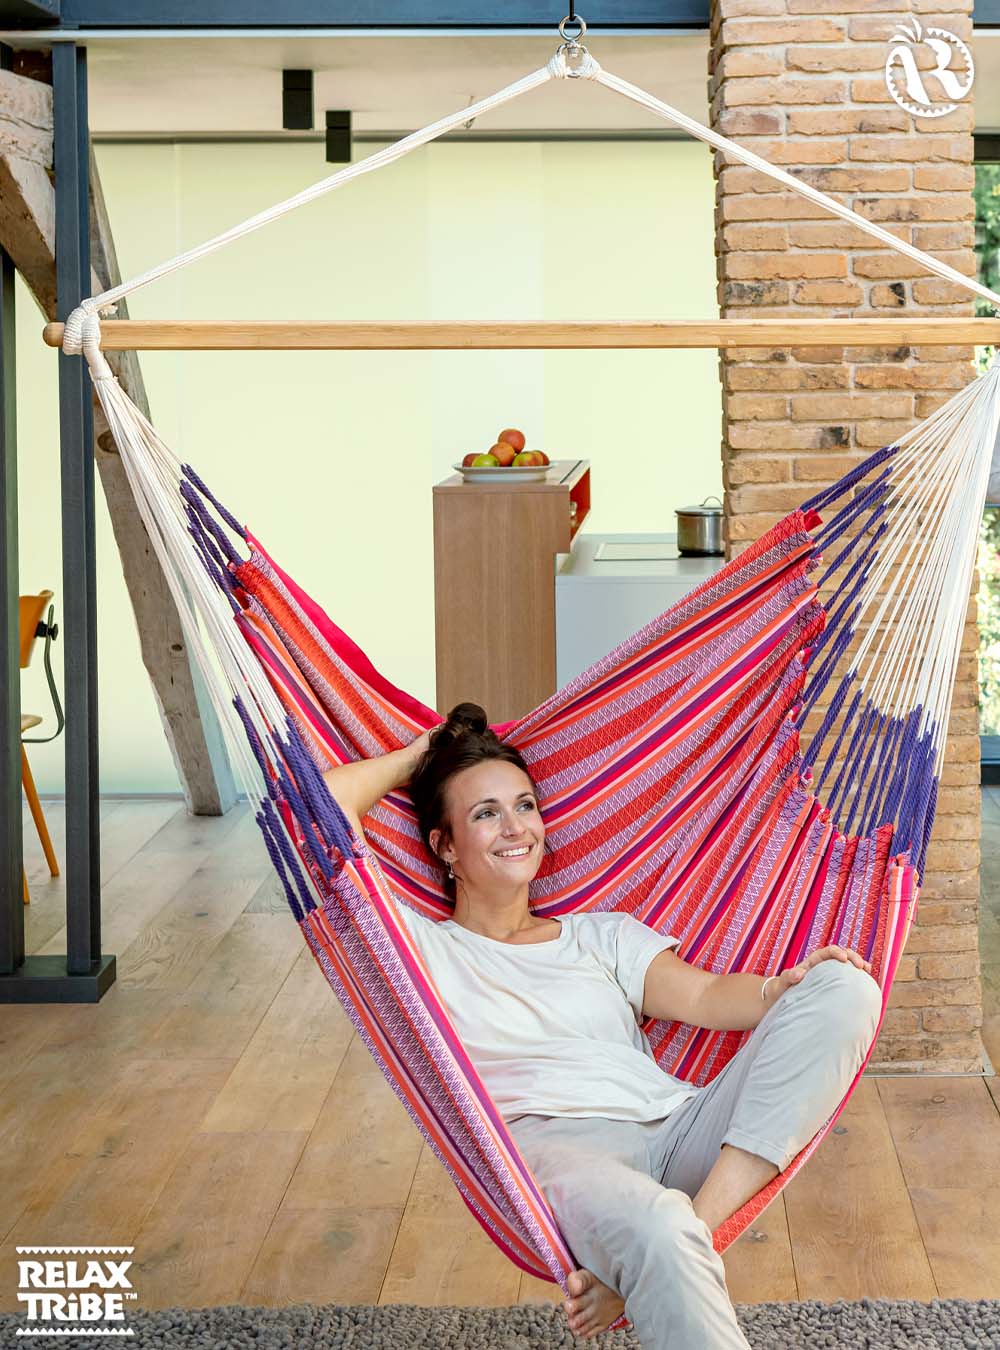 habana-flamingo-eco-lounger-hammock-chair-pure-organic-cotton-fsc-wood-handmade-multicolor-pink-red-patterns-indoor-ceiling